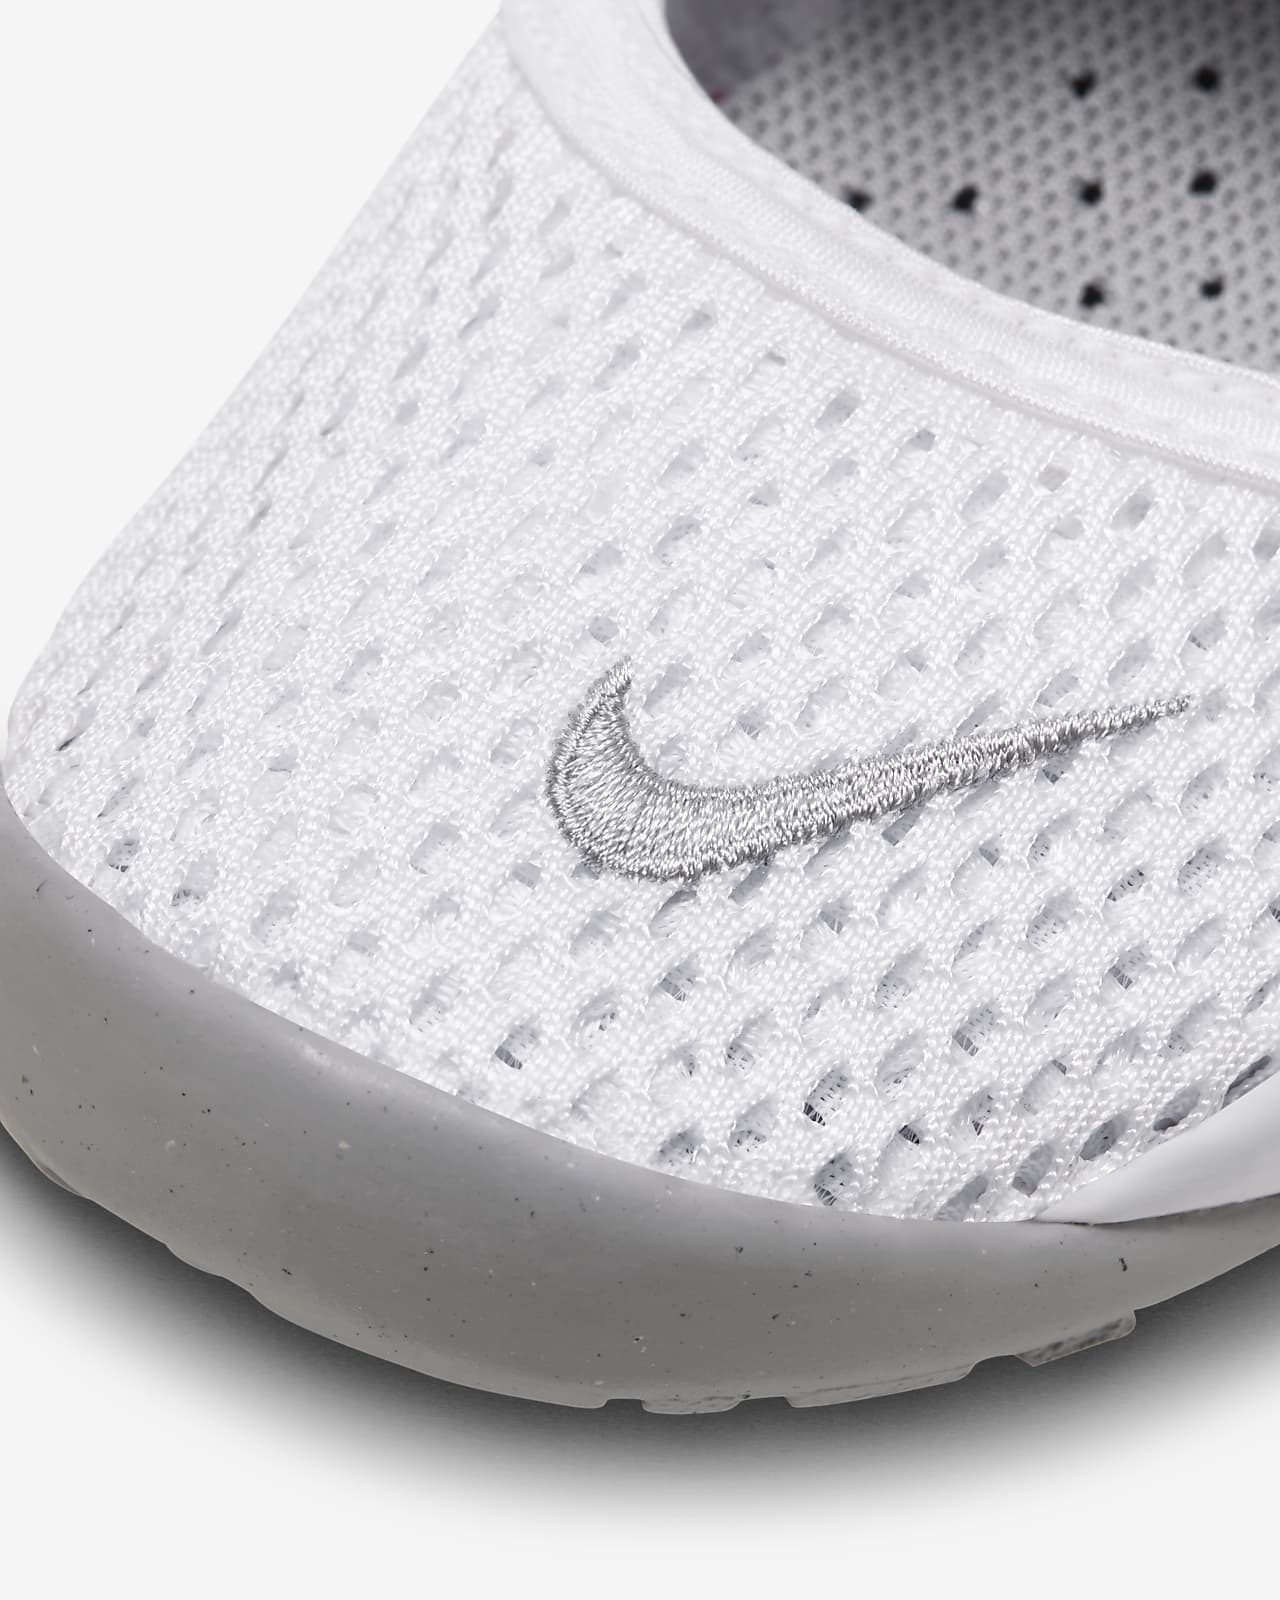 nike rift infant trainers white wolf grey